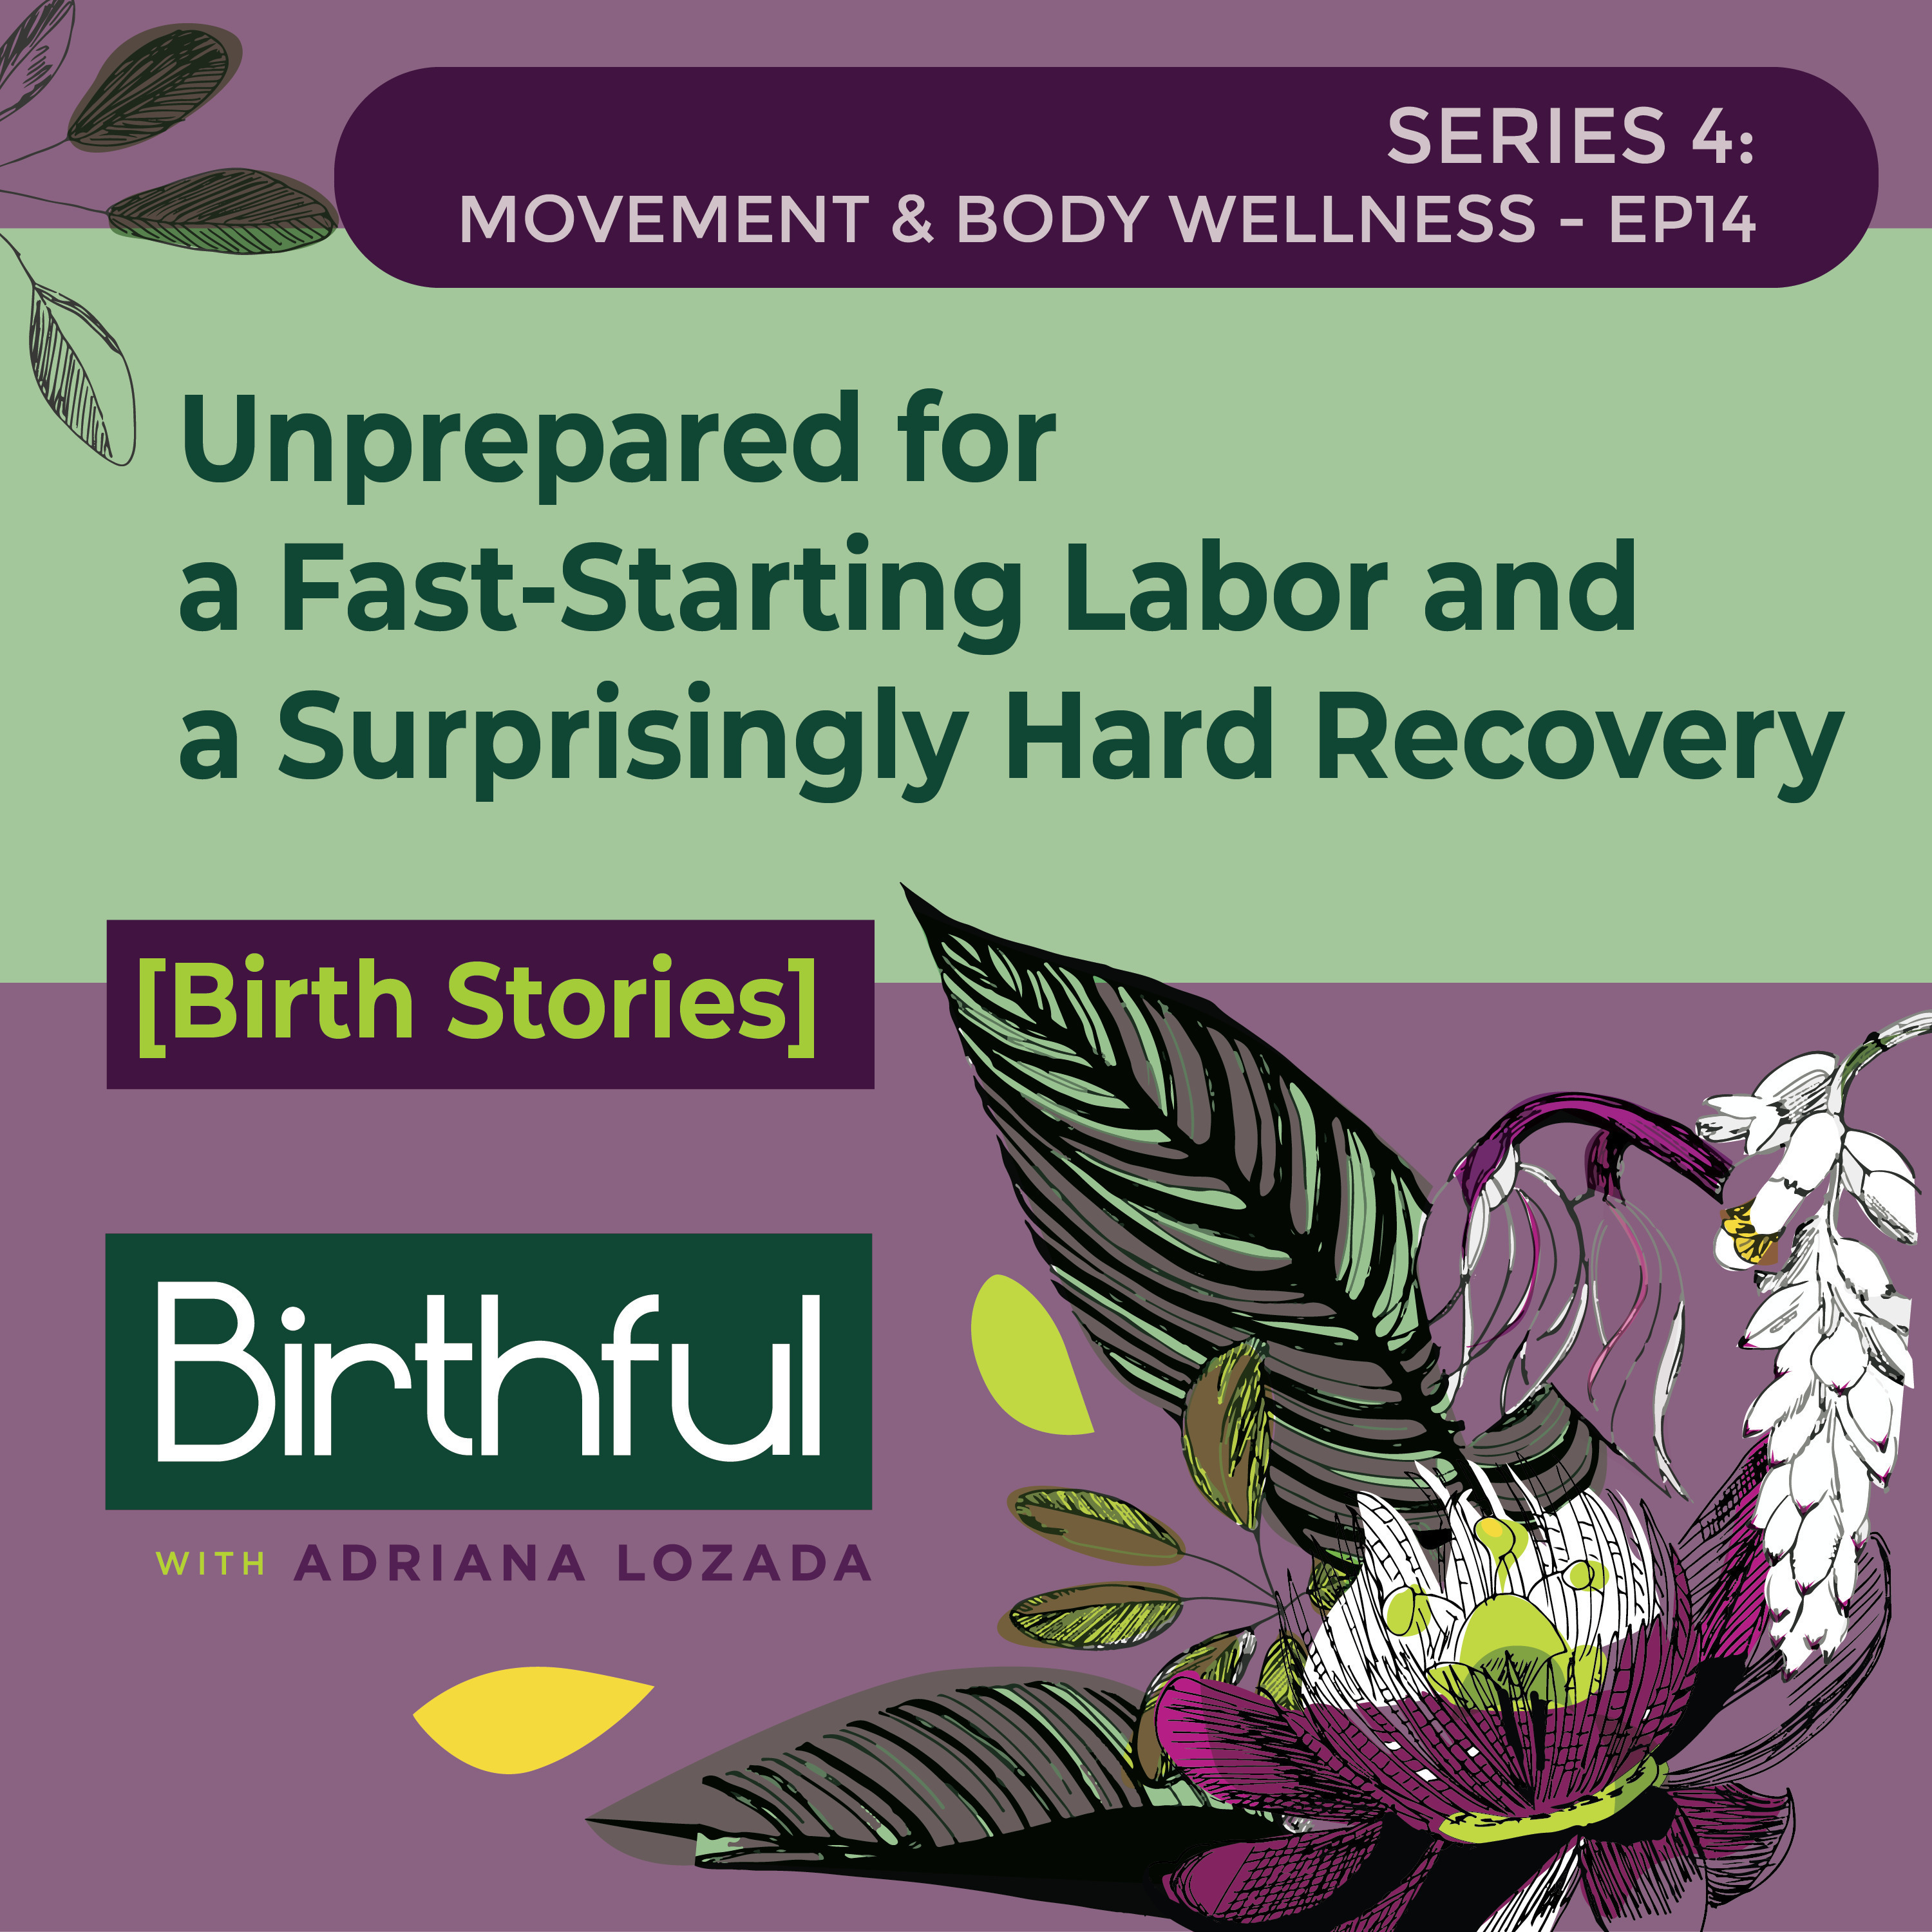 [Birth Stories] Unprepared for a Fast-Starting Labor and a Surprisingly Hard Recovery